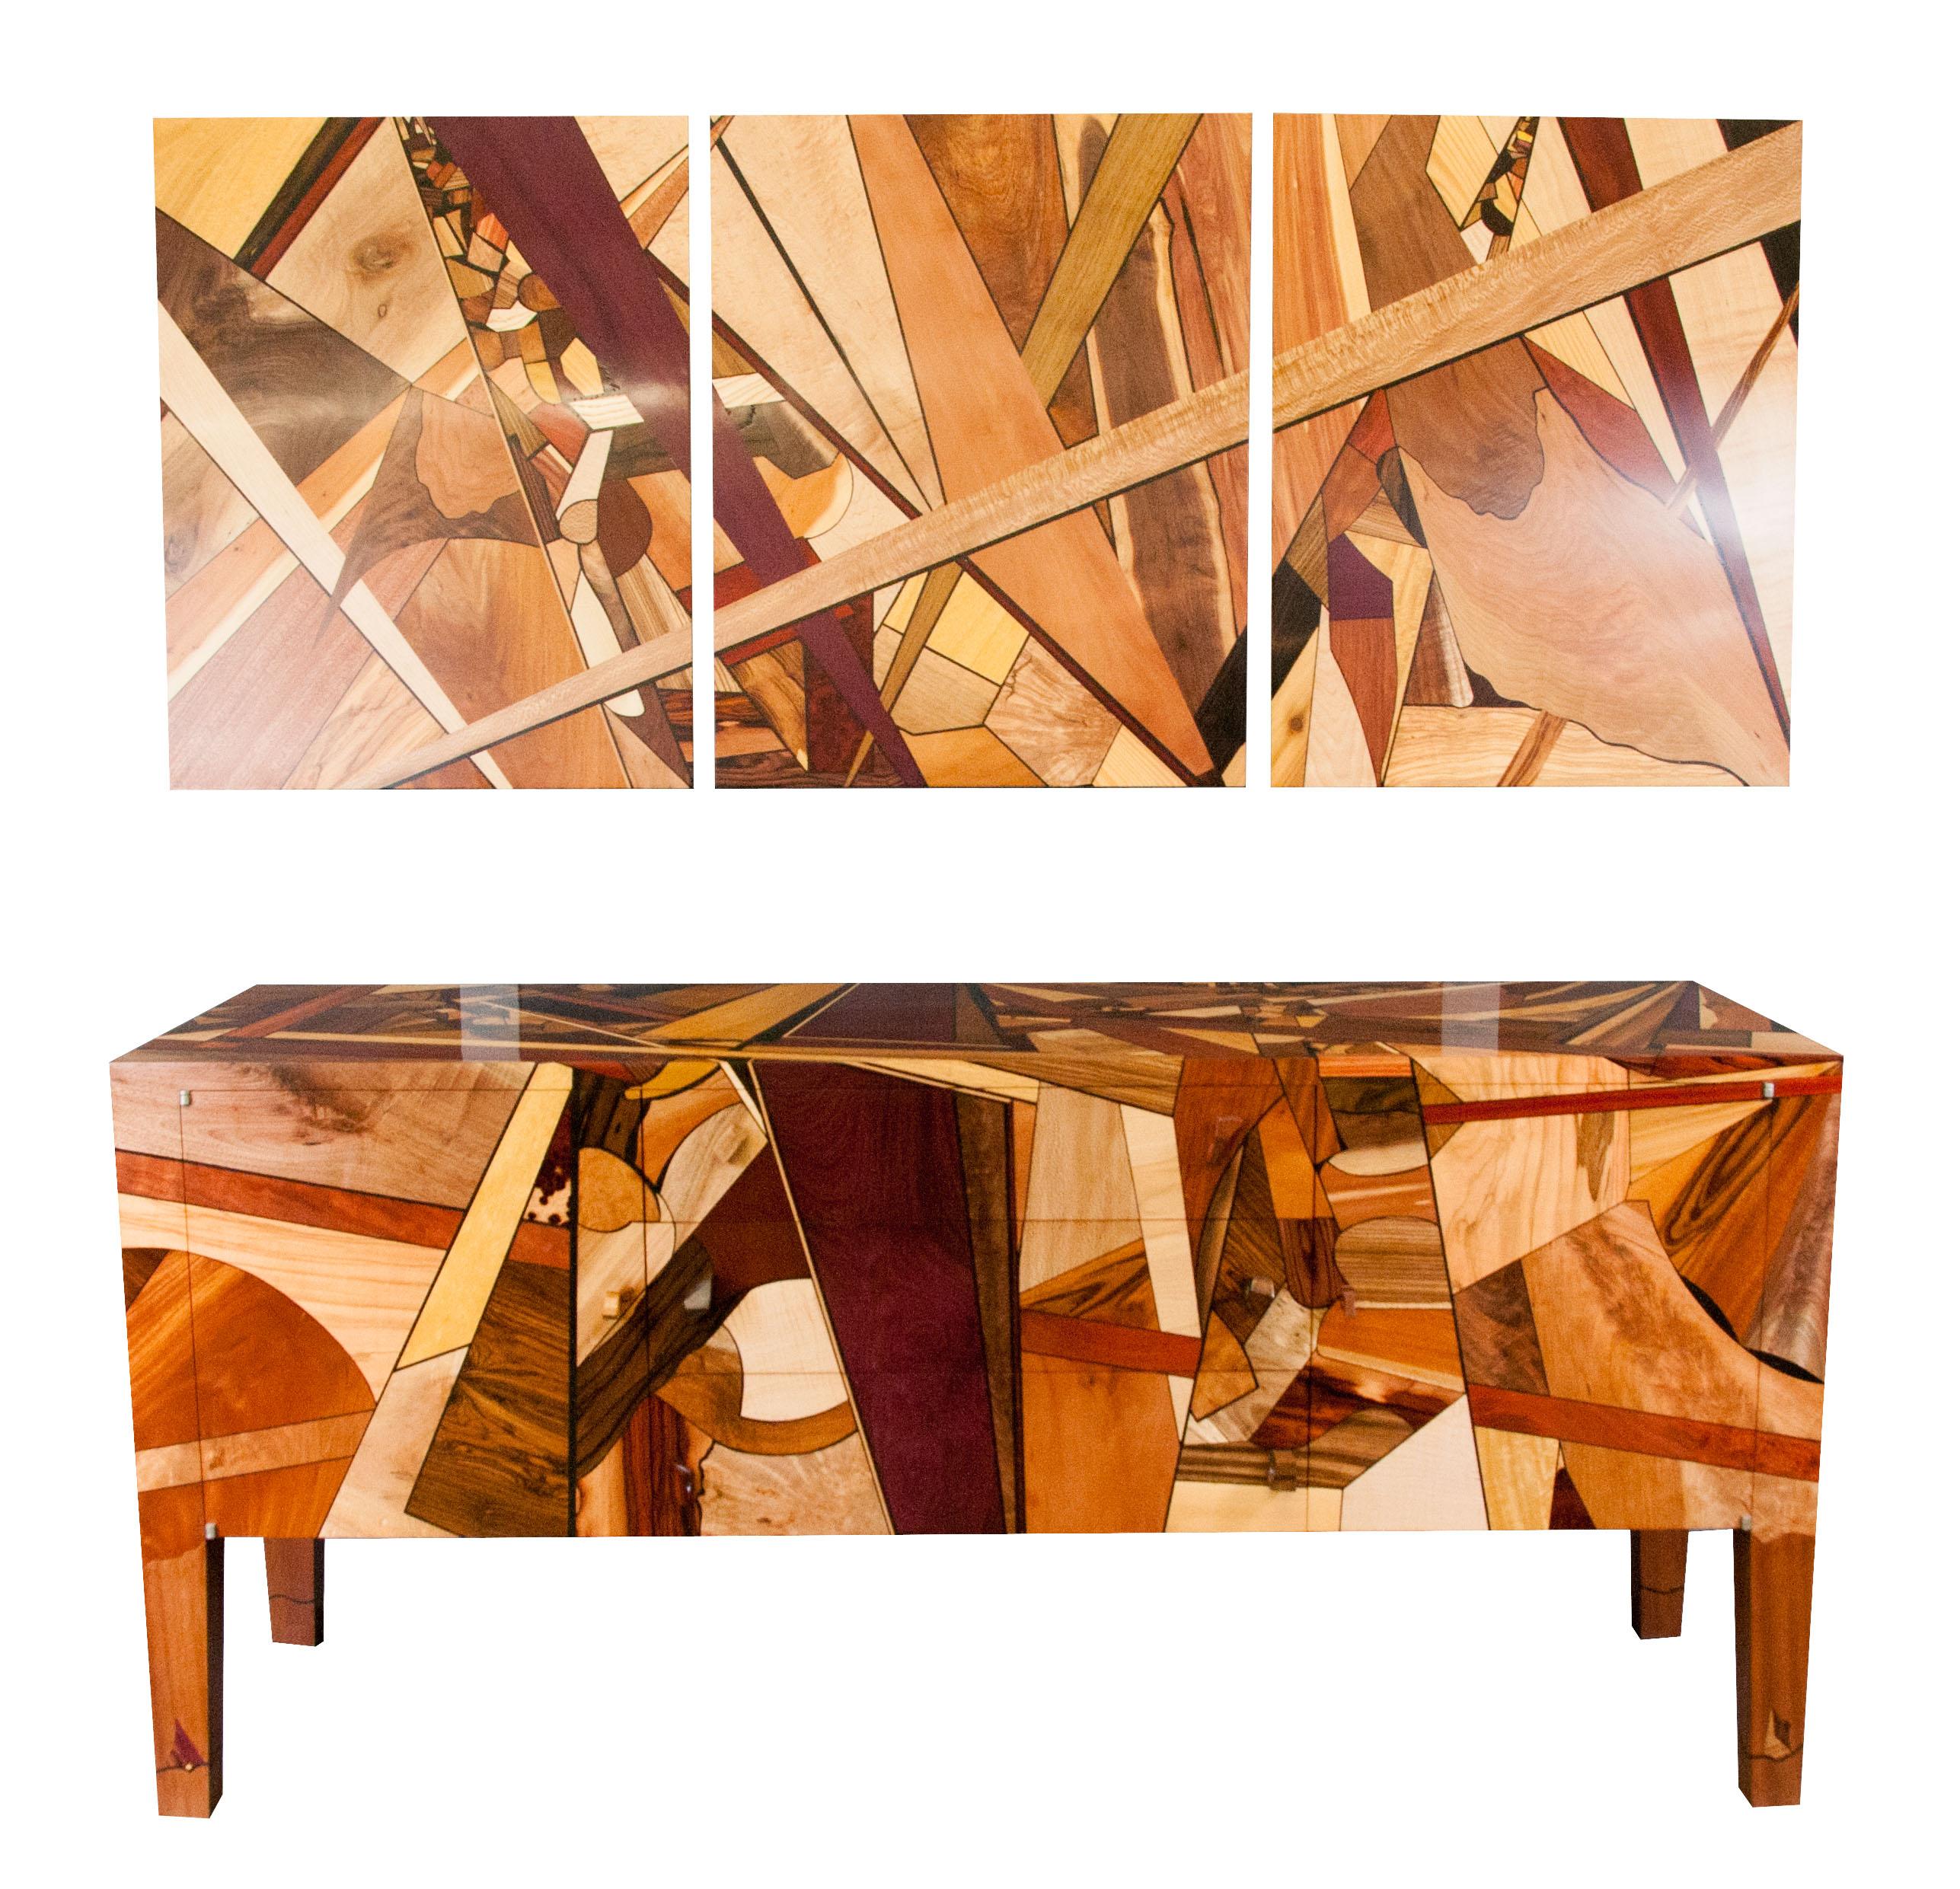 Hand-Crafted Colorful, Art Inspired,  Mosaic Decorated, Meticulously  Crafted, Credenza For Sale